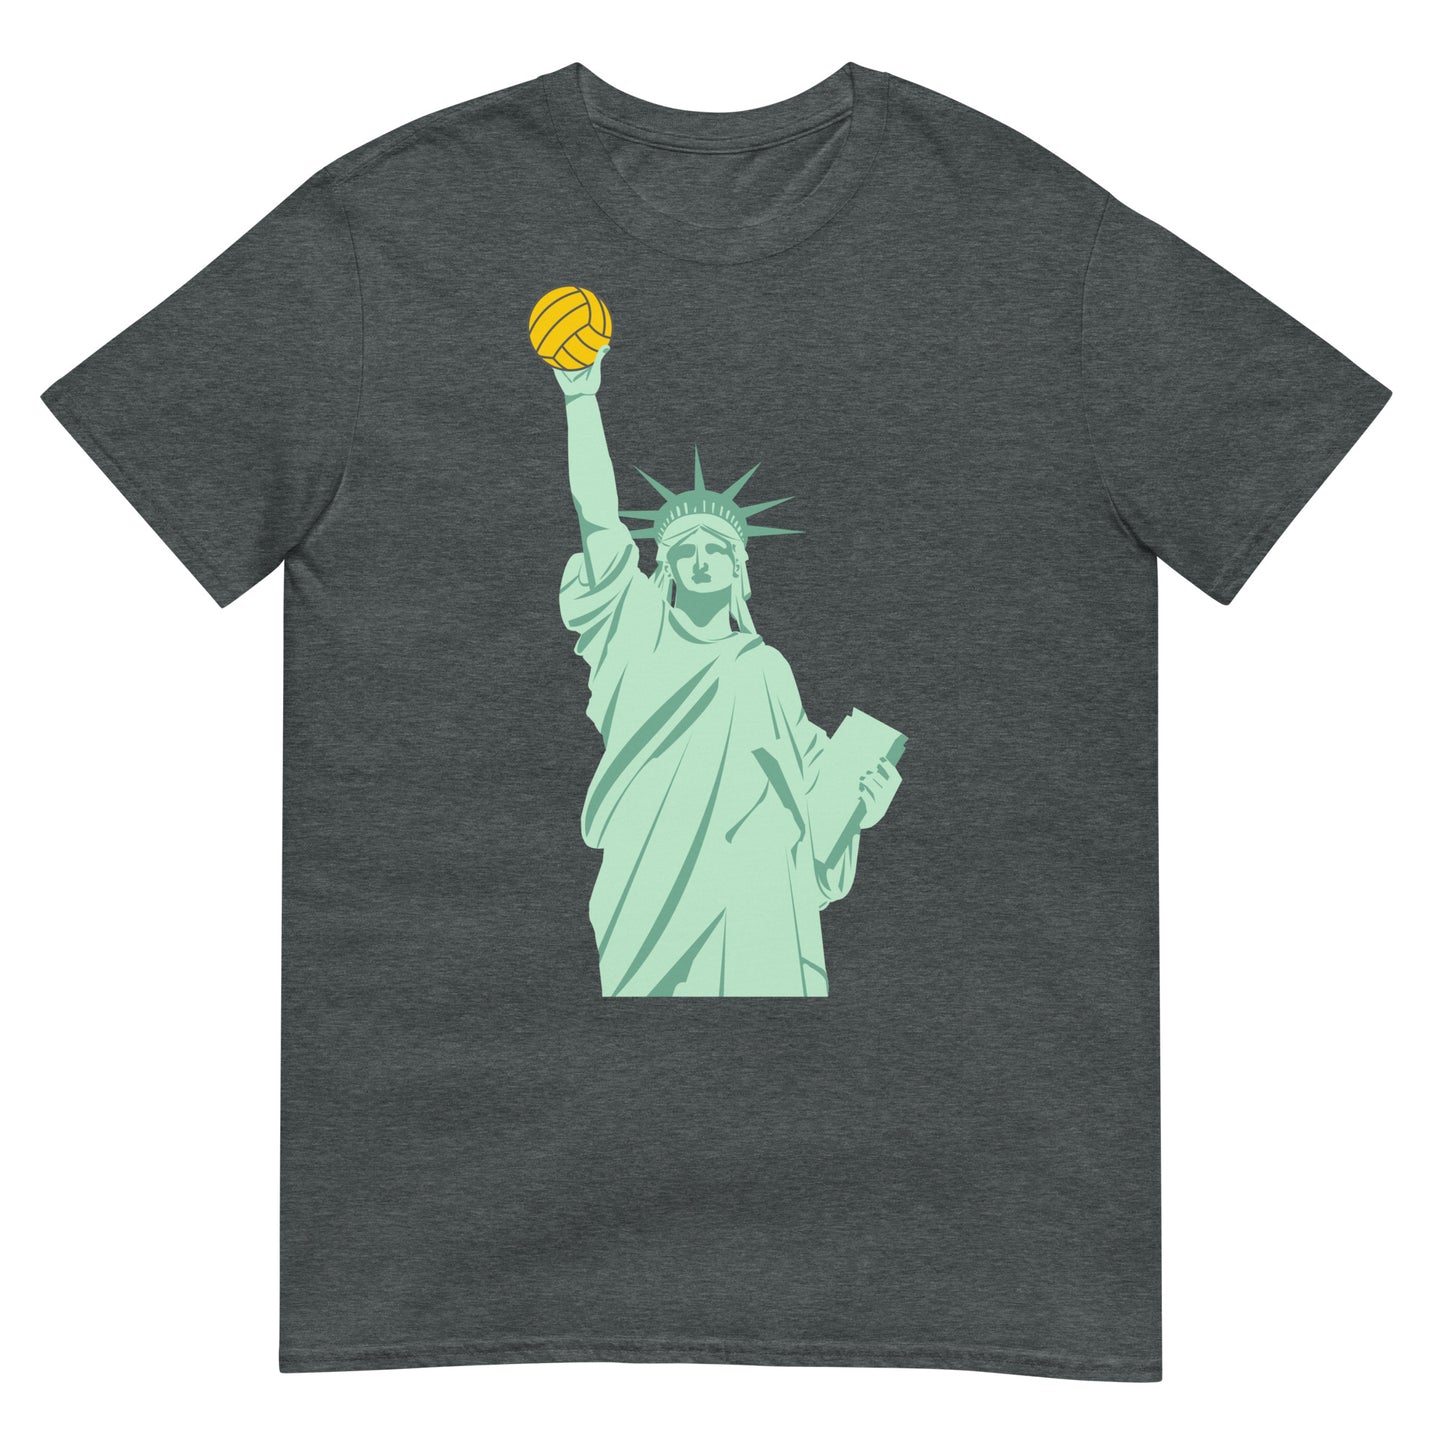 Statue of Liberty Water Polo Short-Sleeve Unisex T-Shirt